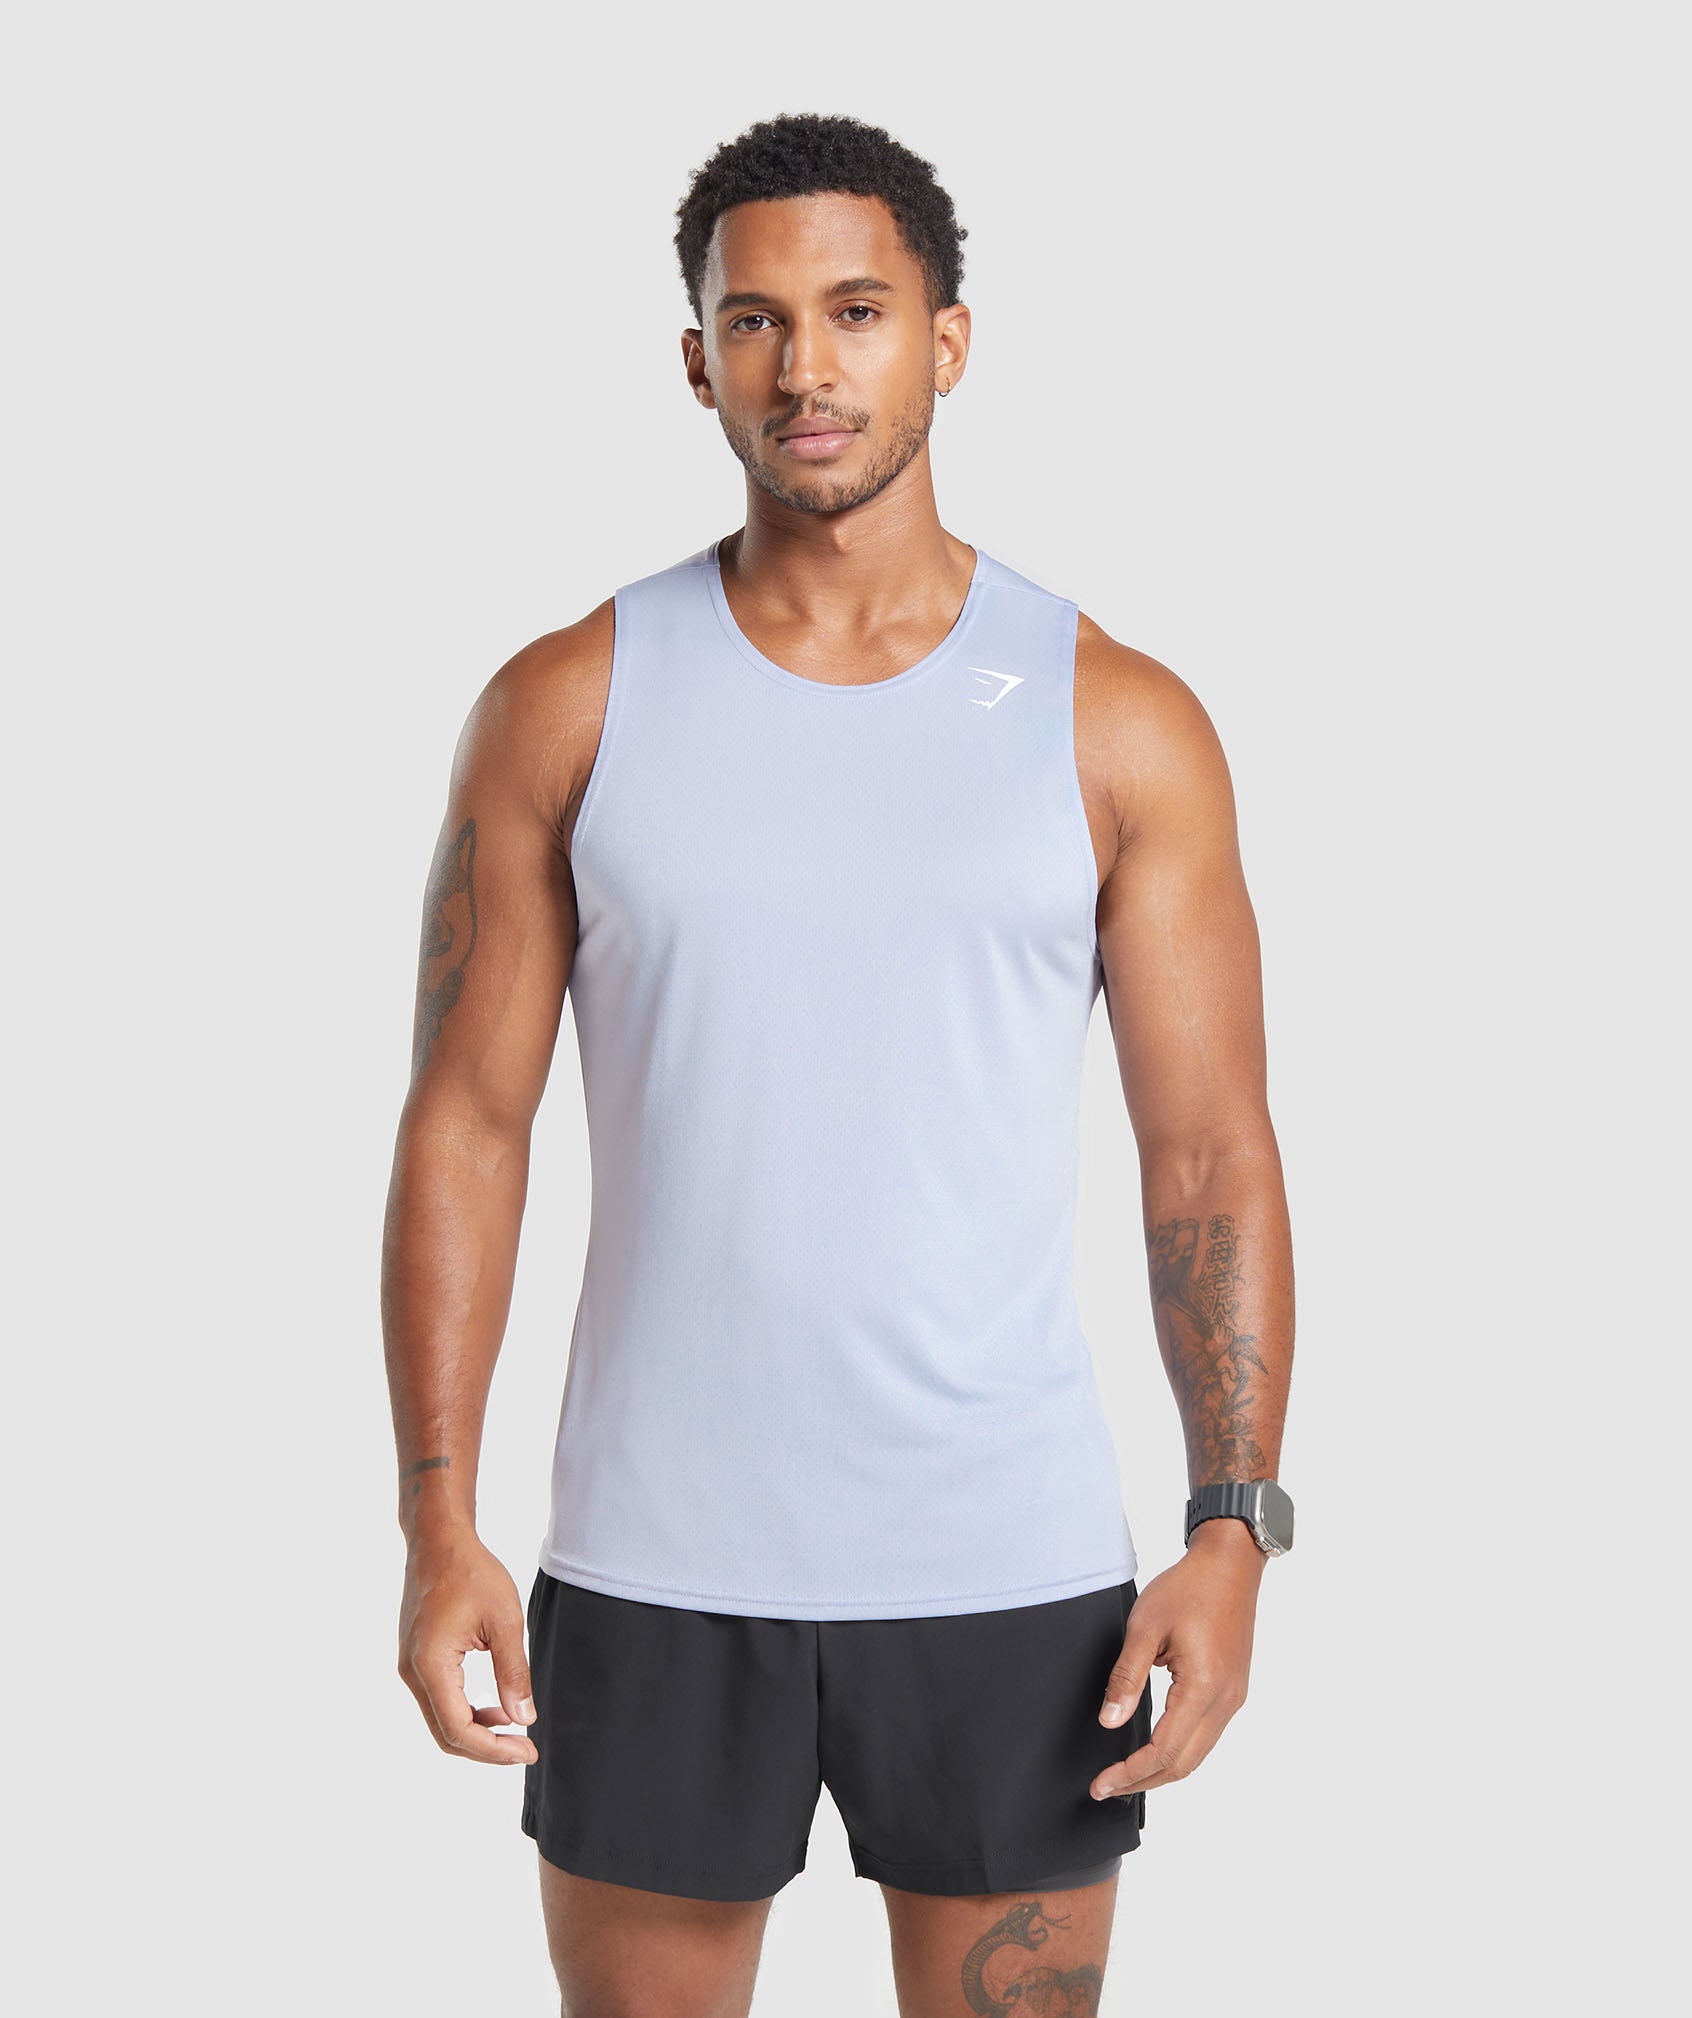 Arrival Tank in Silver Lilac is out of stock